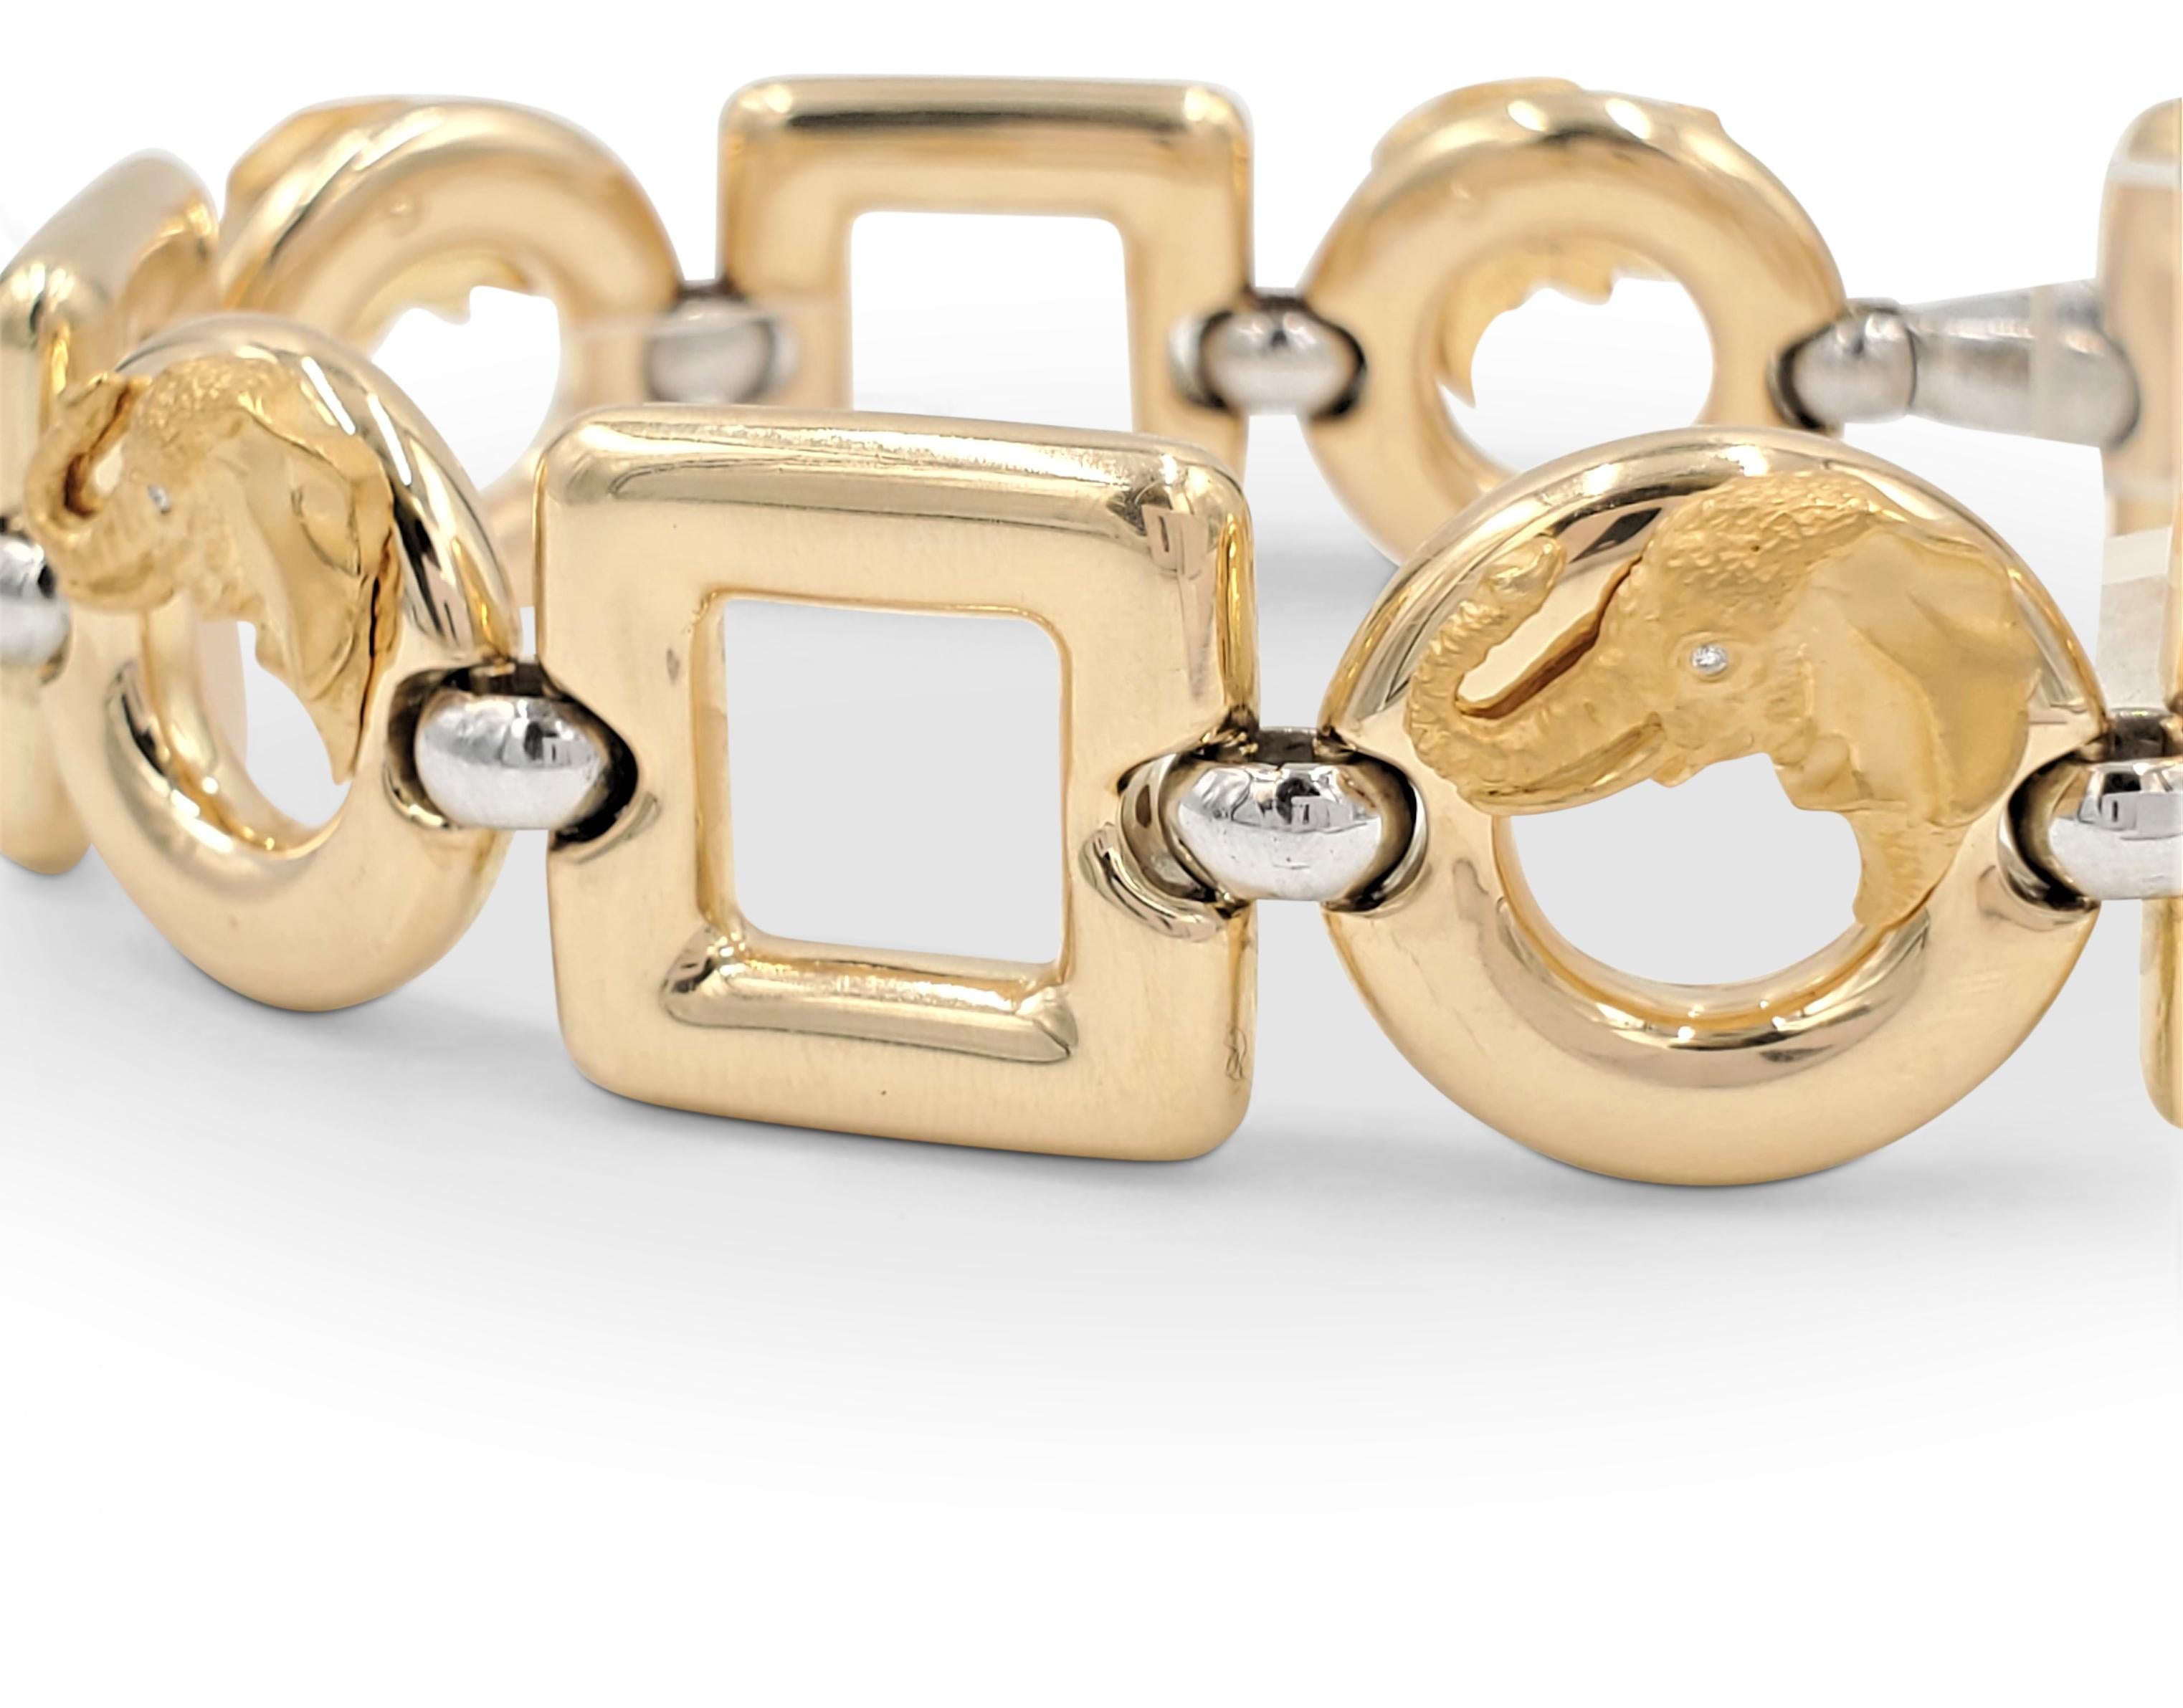 Authentic Carrera y Carrera bracelet comprised of alternating round and square 18 karat yellow gold links separated by white gold components. An elephant head motif adorns each round link. Each elephant head is completed with a round brilliant cut